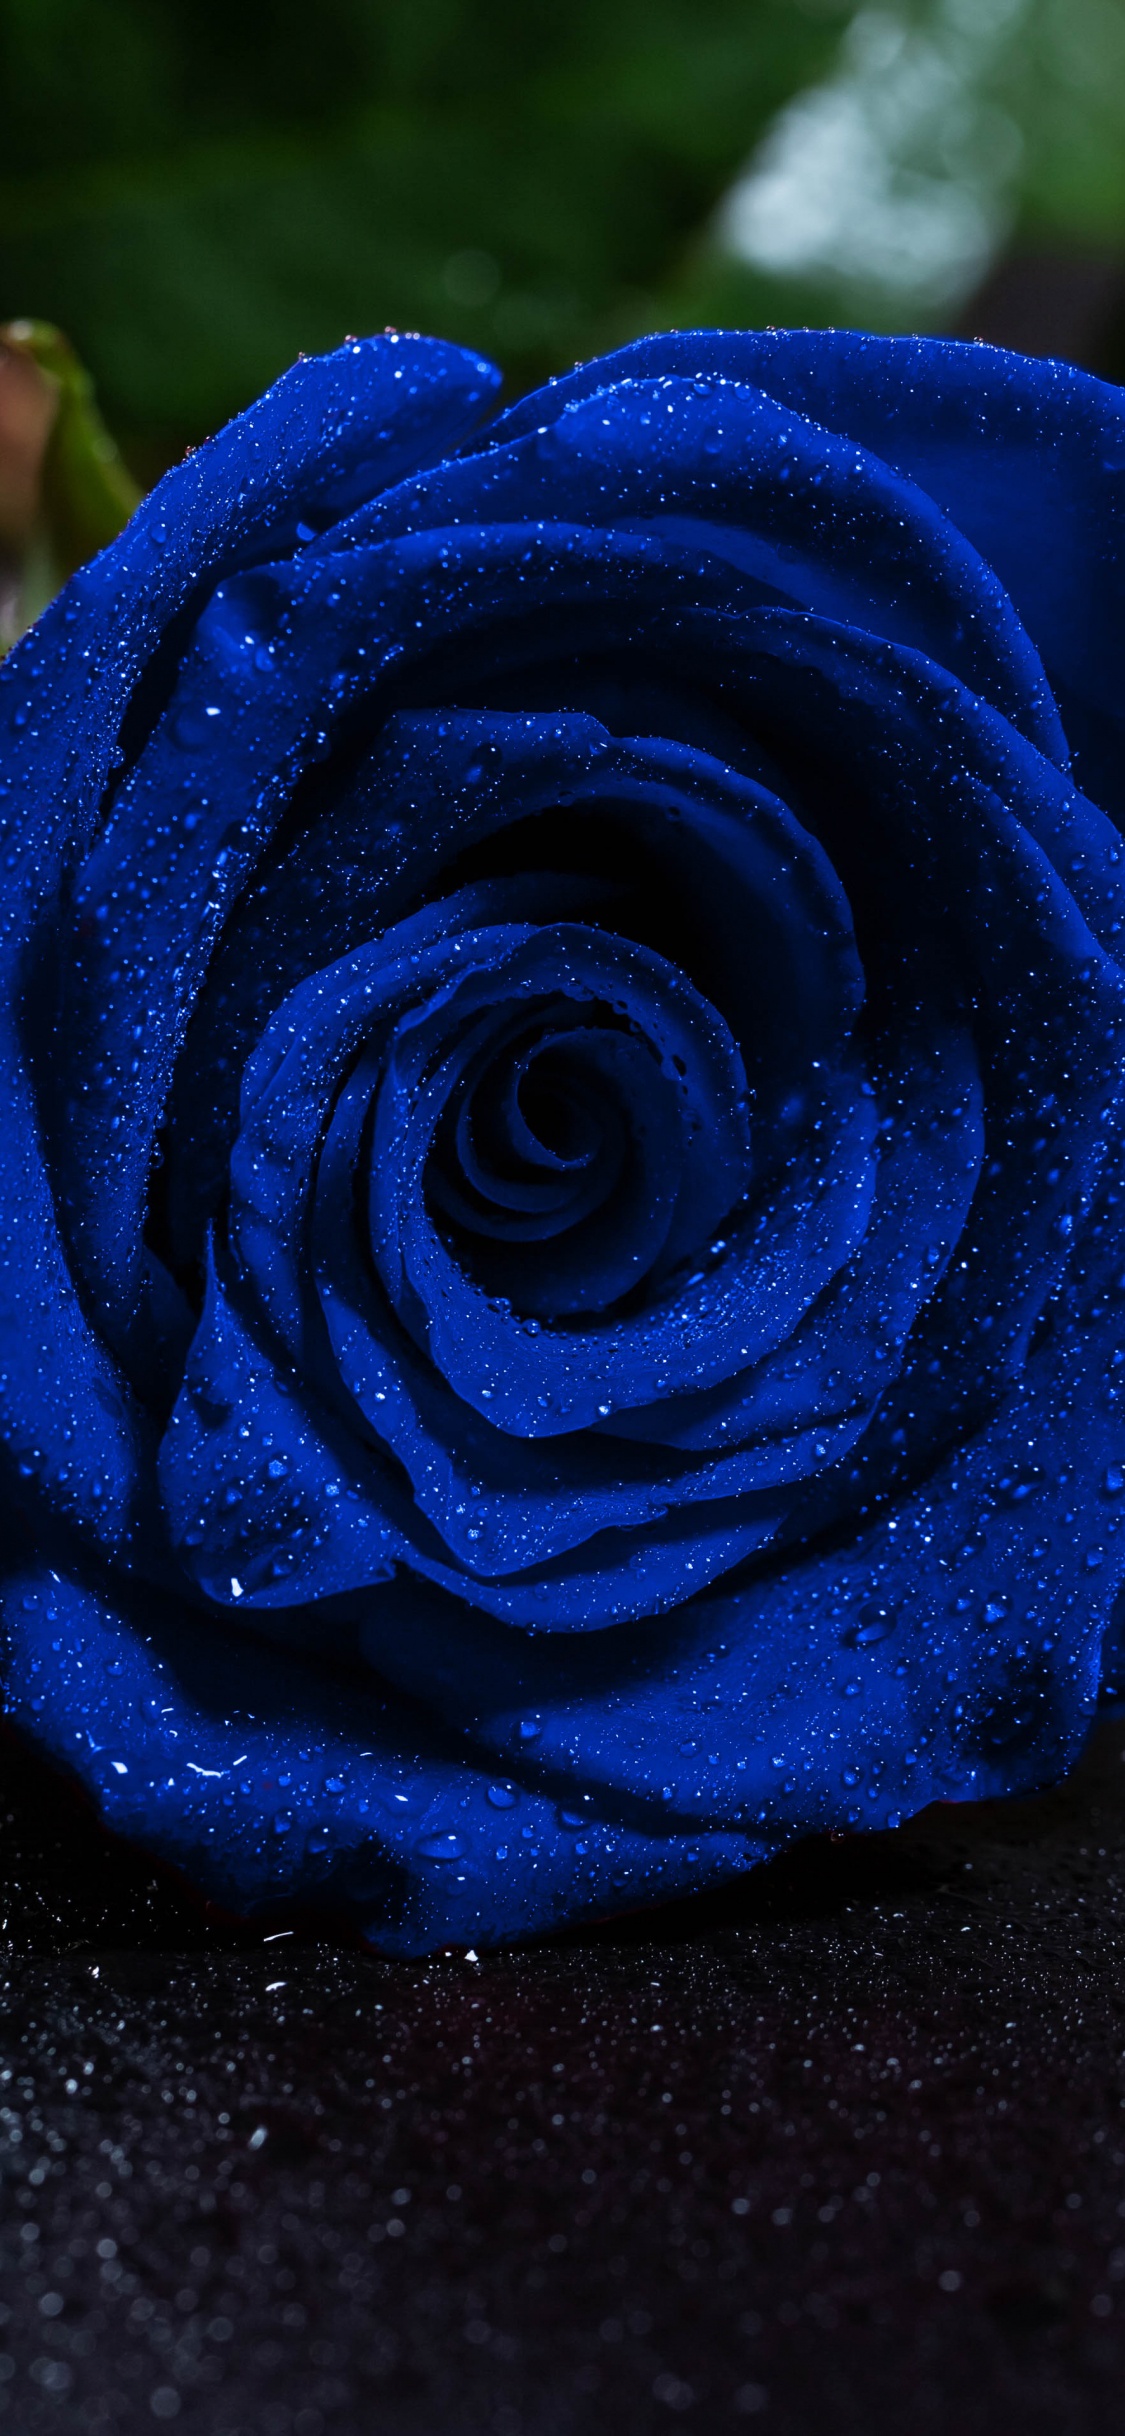 Blue Rose on Black Surface. Wallpaper in 1125x2436 Resolution